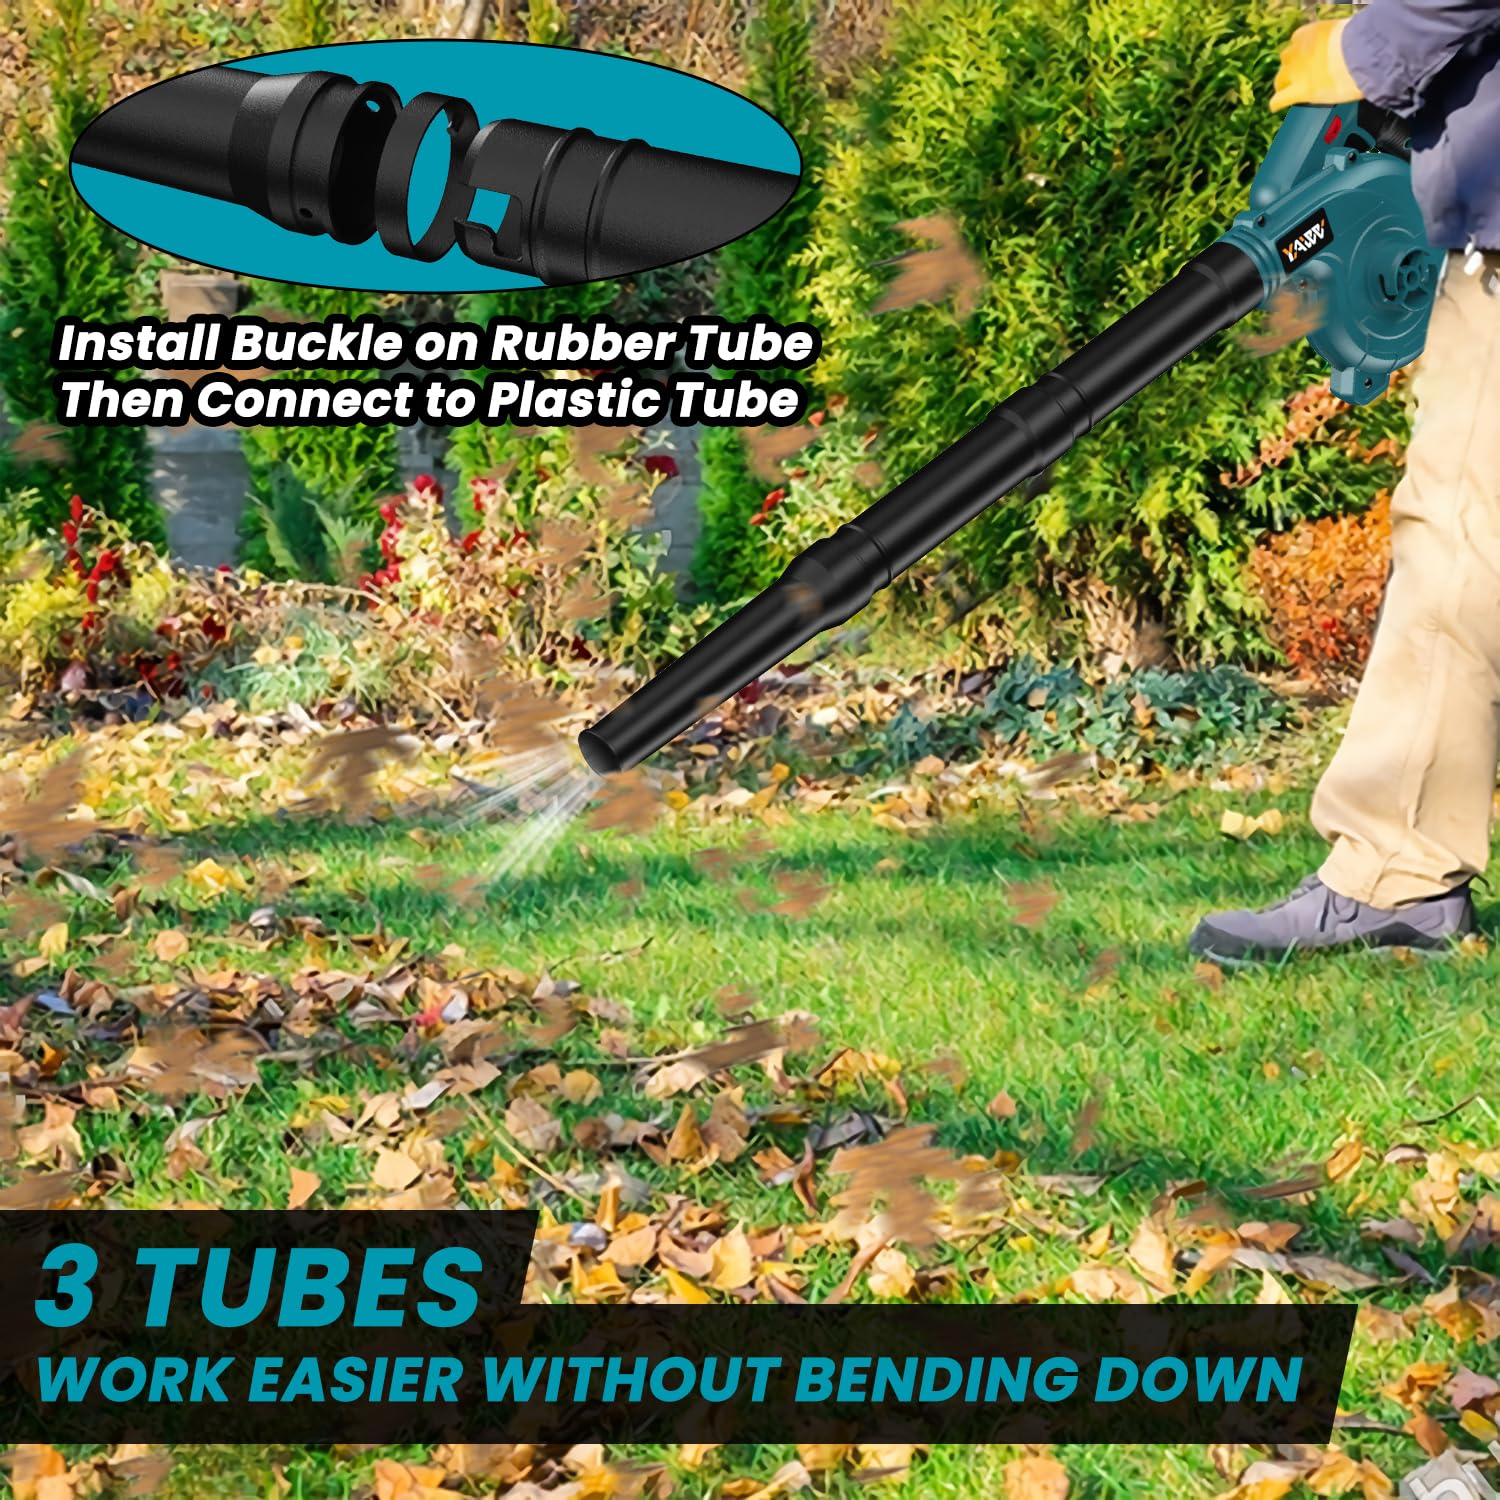 Cordless Leaf Blower for Makita 18V Battery,Electric Jobsite Air Blower with Brushless Motor,6 Variable Speed Up to 180MPH,2-in-1 Handle Electric Blower and Vacuum Cleaner(Battery Not Included)